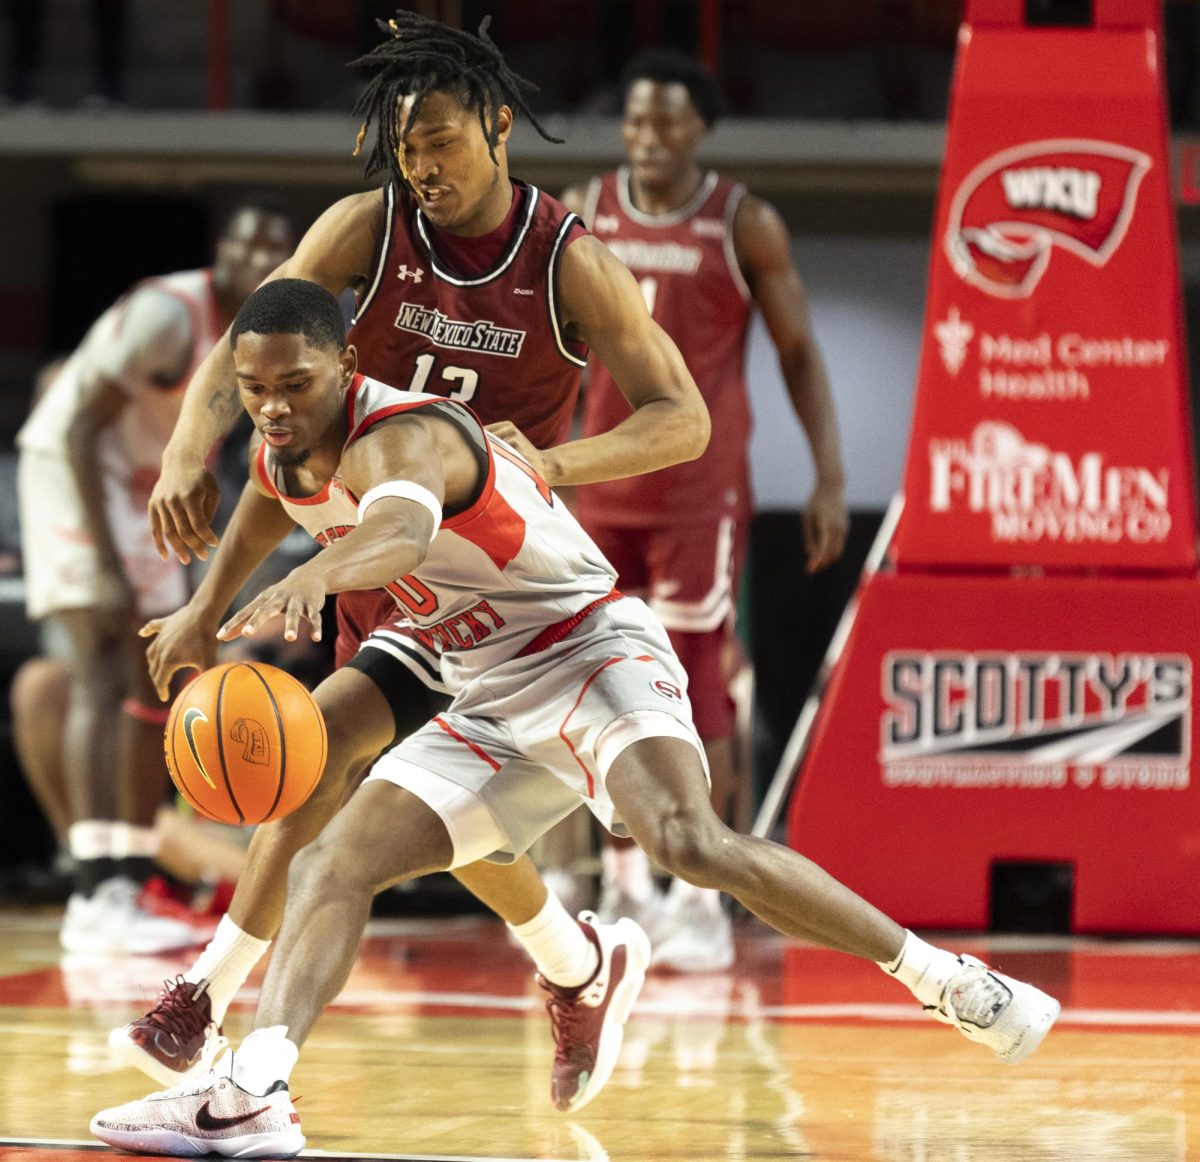 WKU guard Brandon Newman (10) reaches for a loose ball against NMSU guard Jaden Harris (13) during WKU’s Senior Night game in the Diddle Arena on Feb 17.